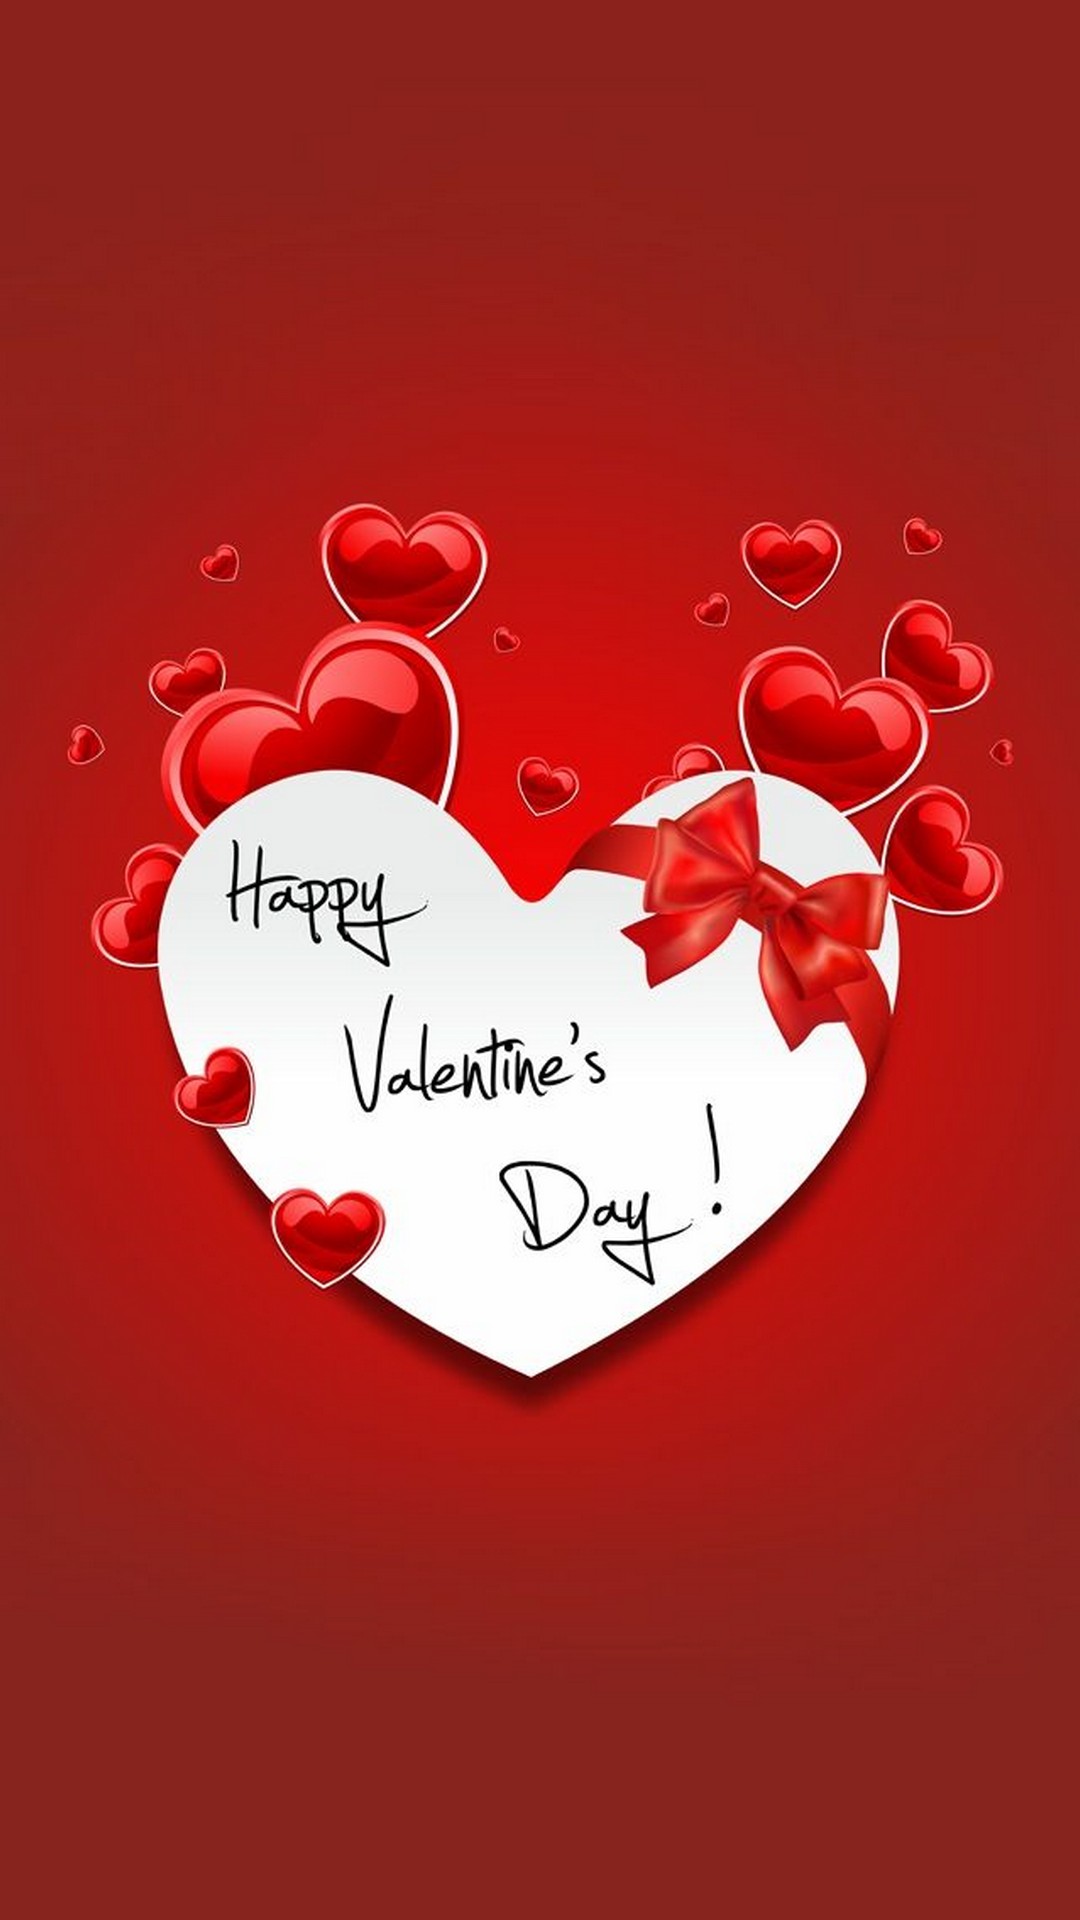 Wallpaper Happy Valentines Day Image Android